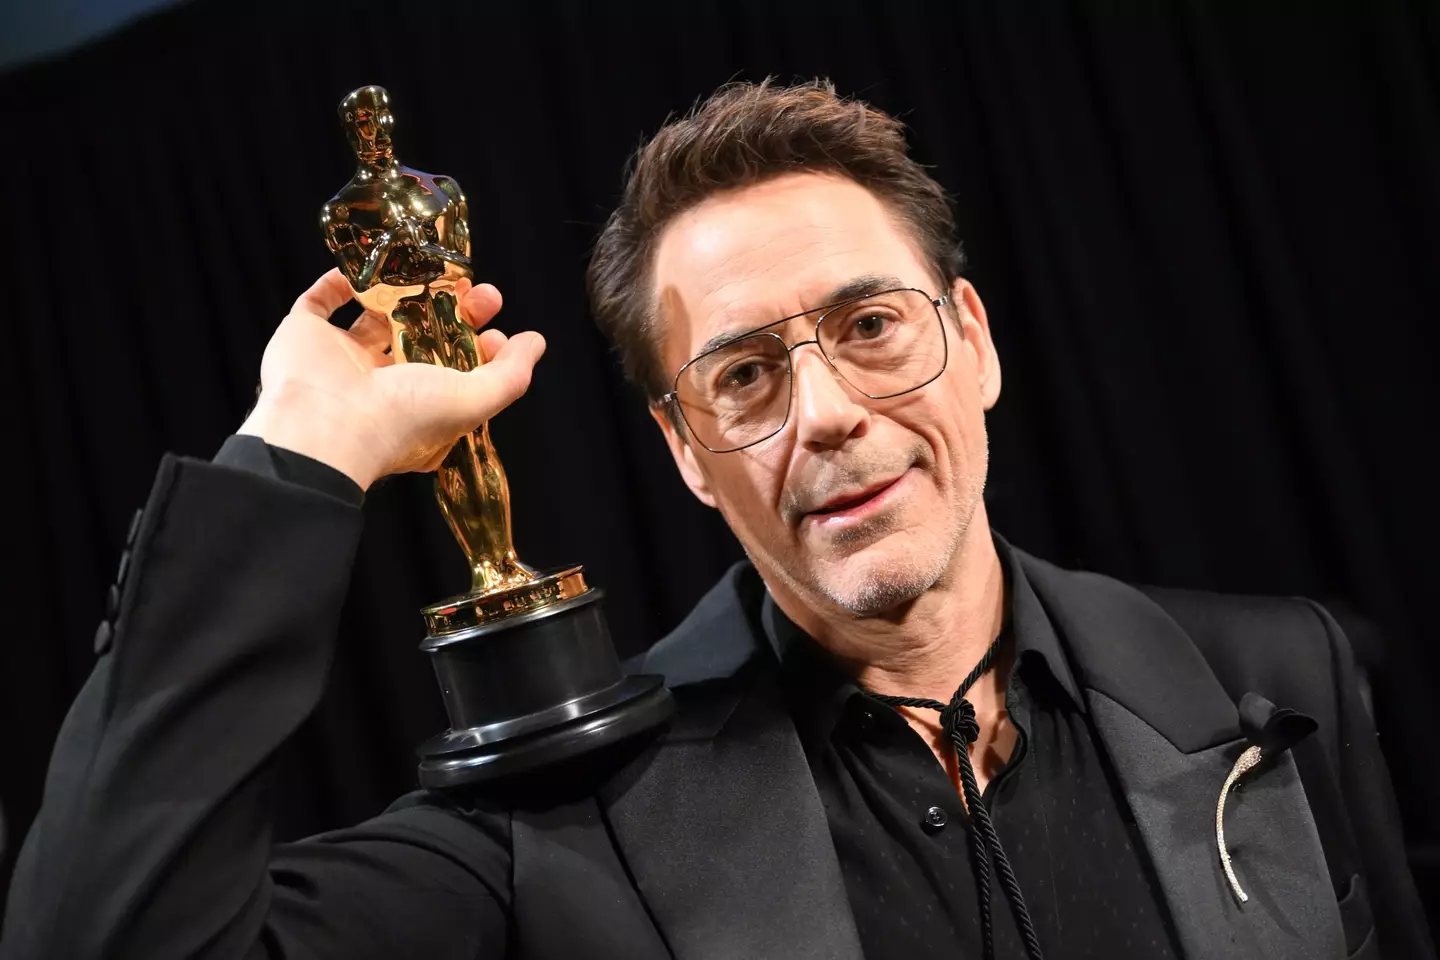 Despite winning one of the most coveted awards for an actor, Downey Jr wasn’t always so successful.